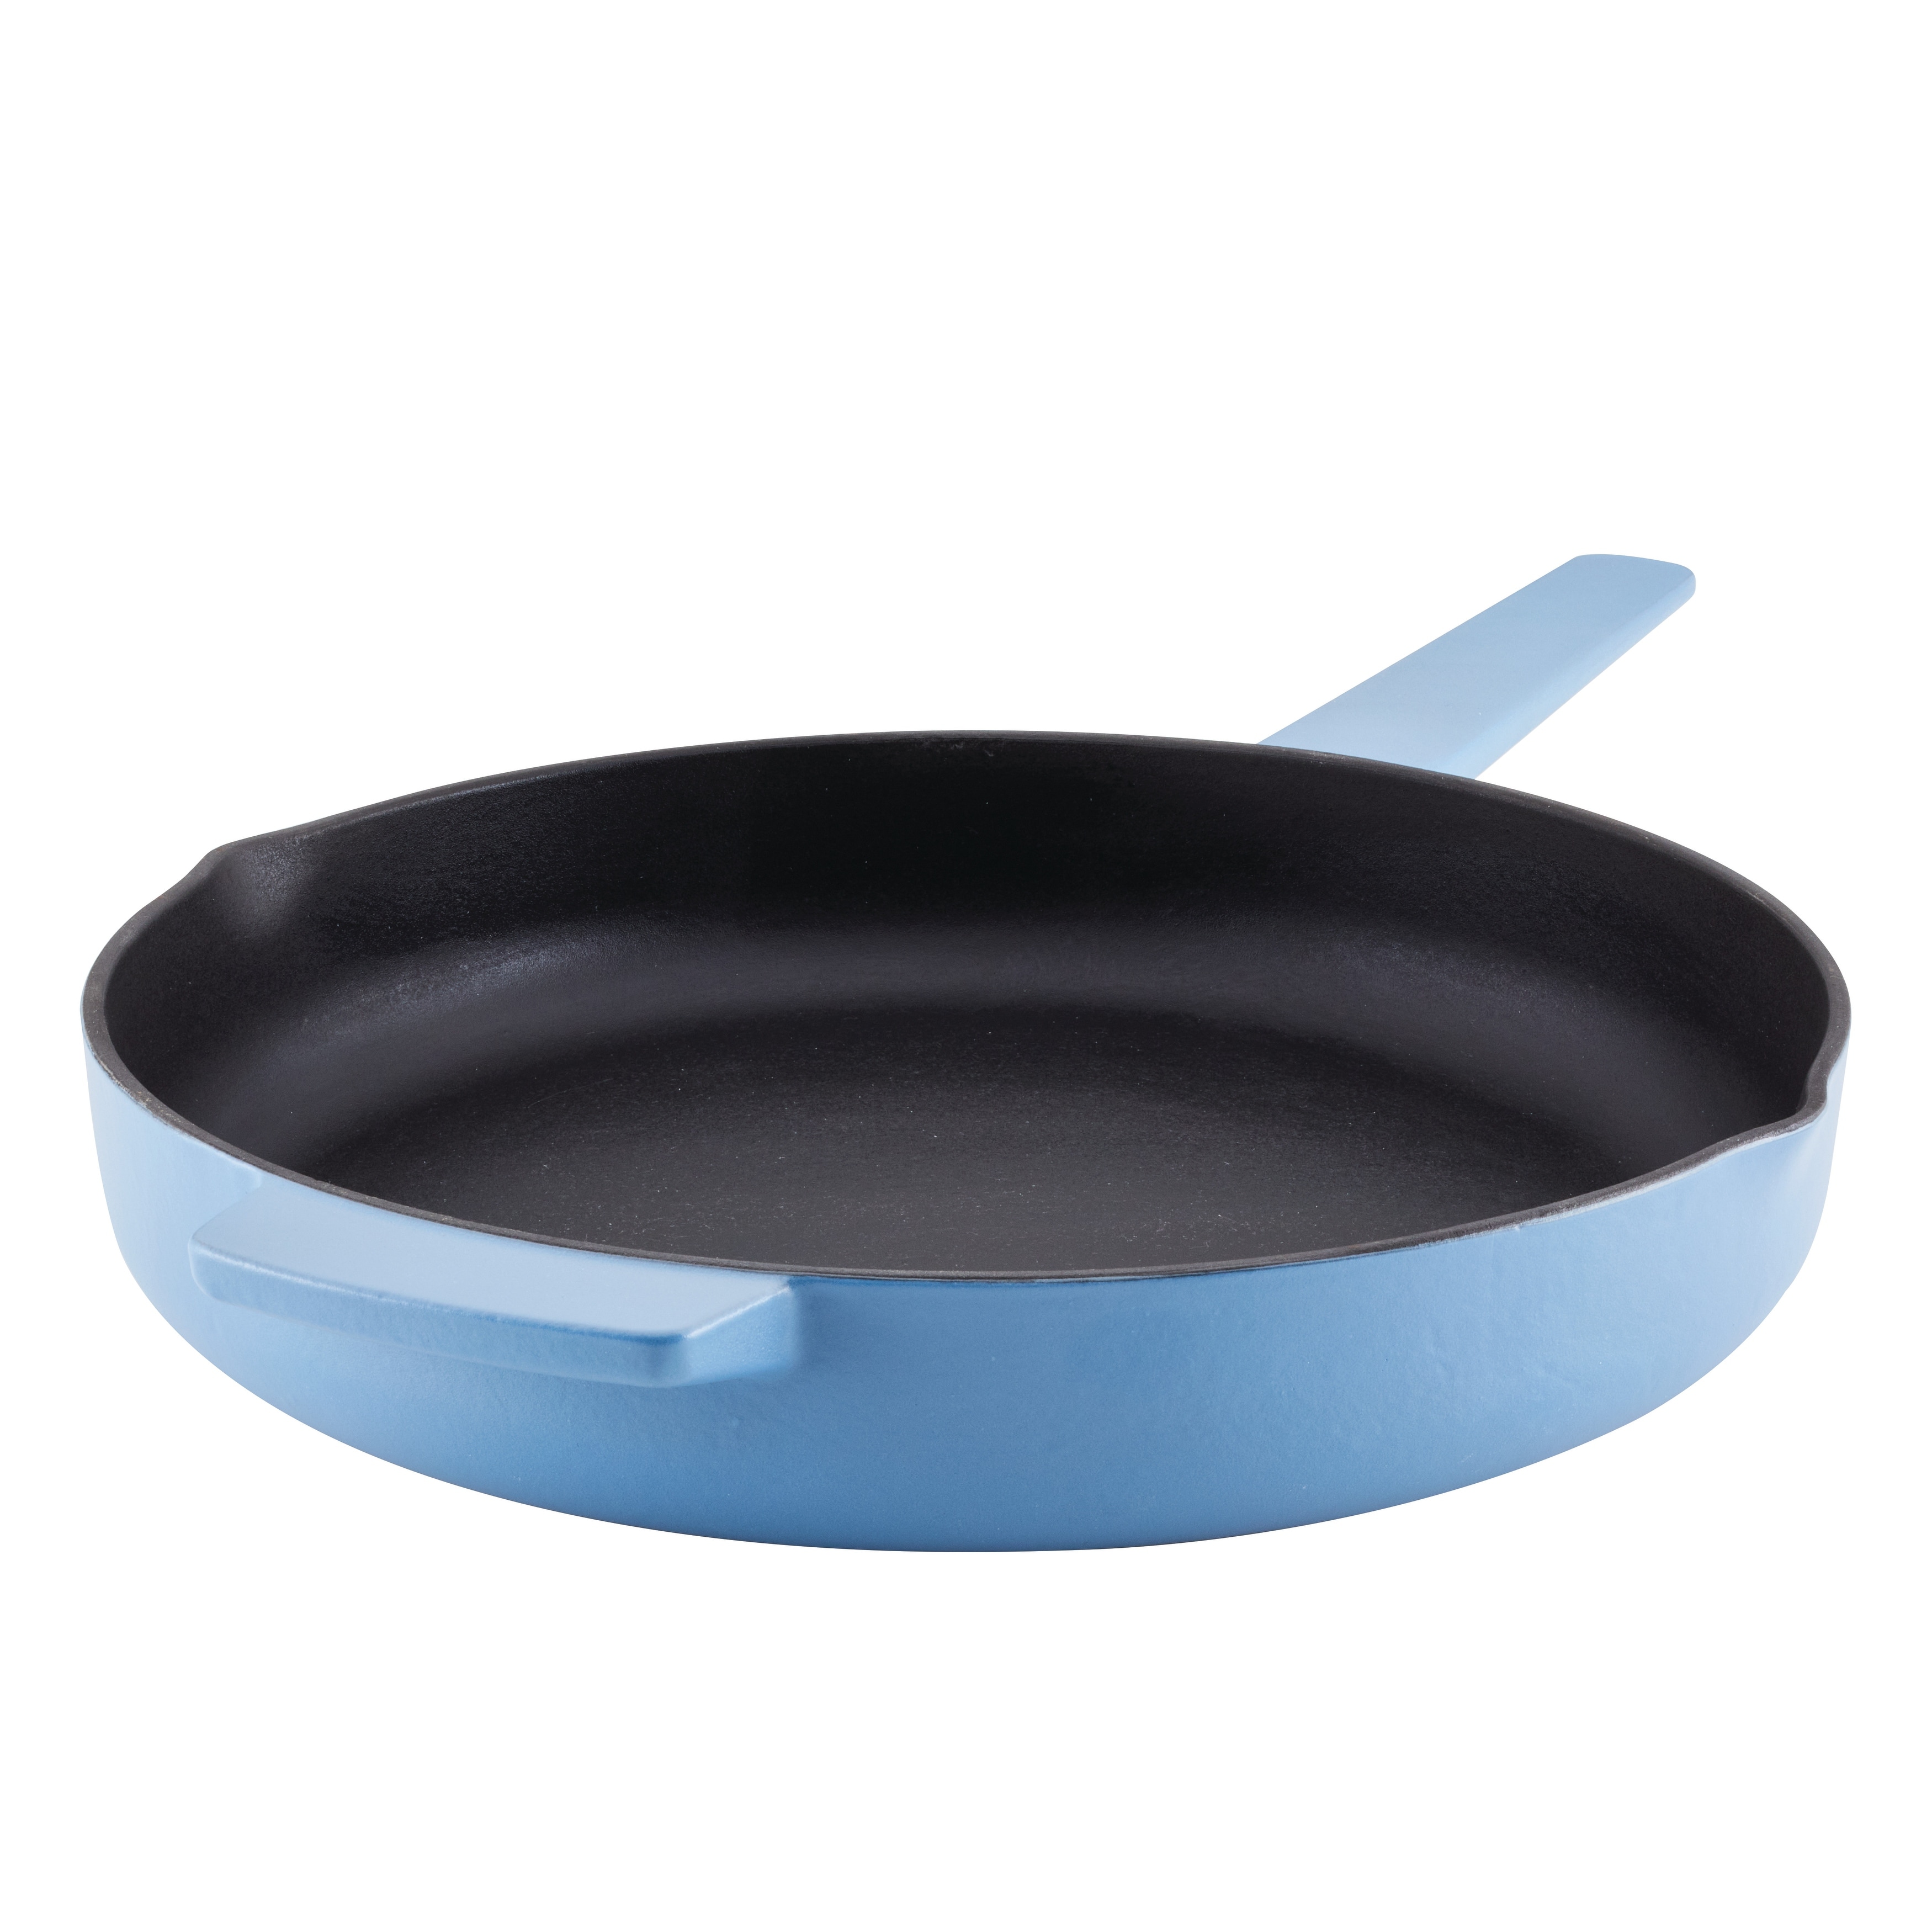 https://ak1.ostkcdn.com/images/products/is/images/direct/dd7da707e92fad3ed9758ff6ae257a0bb0c5c6cd/KitchenAid-Enameled-Cast-Iron-Induction-Skillet-with-Helper-Handle-and-Pour-Spouts%2C-12-Inch%2C-Blue-Velvet.jpg